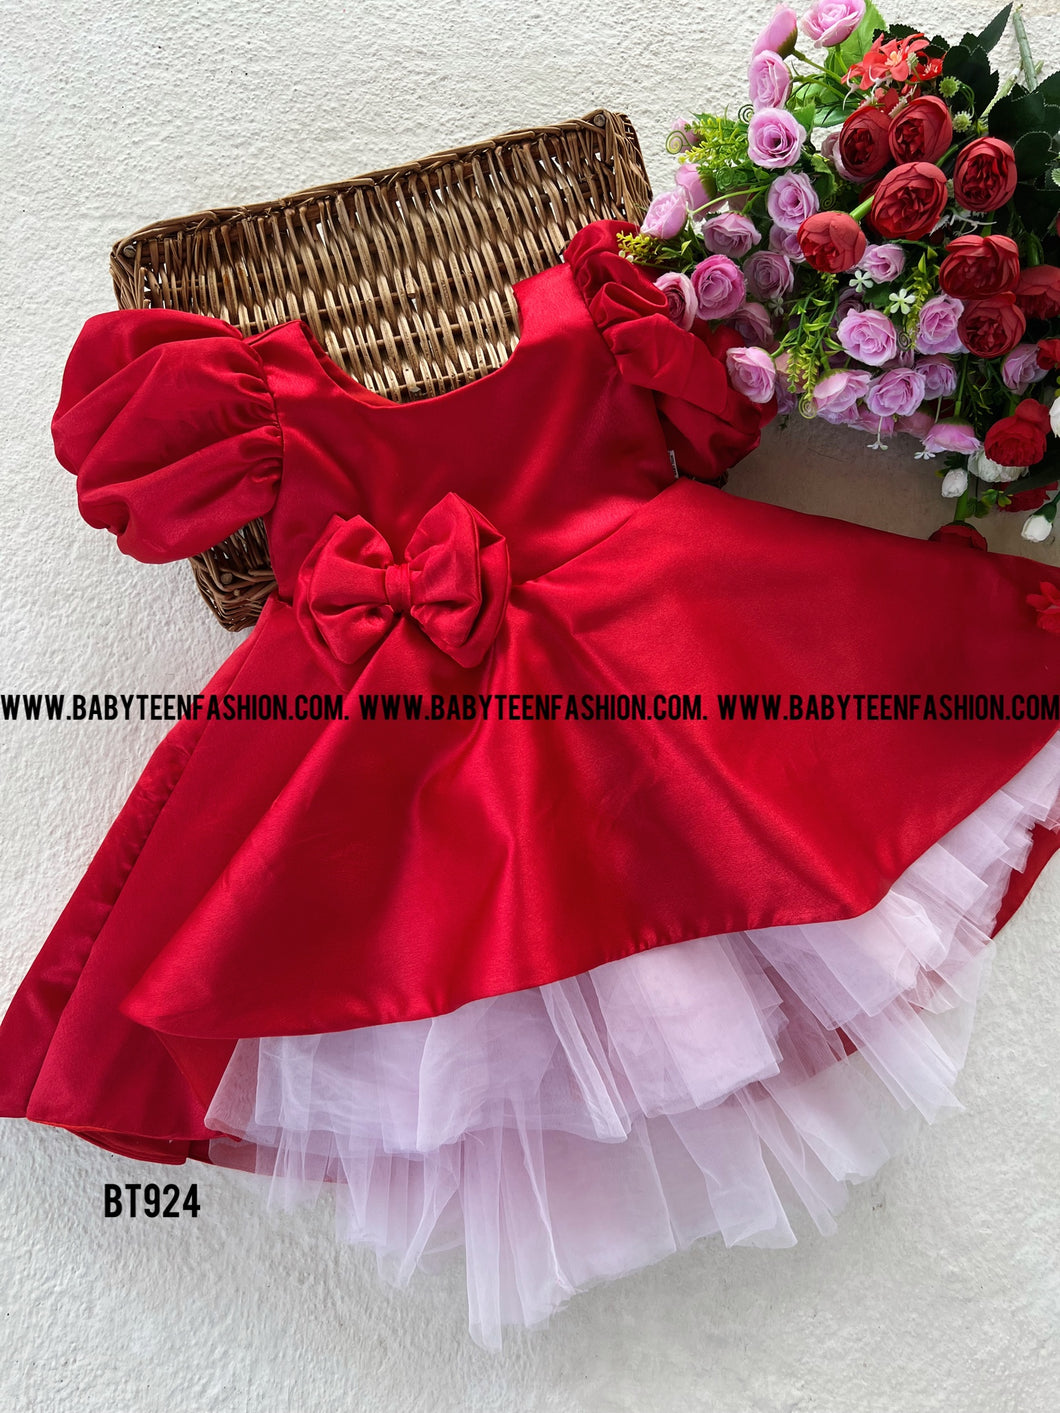 BT924 Scarlet Blossom Party Frock - Celebrate in Style